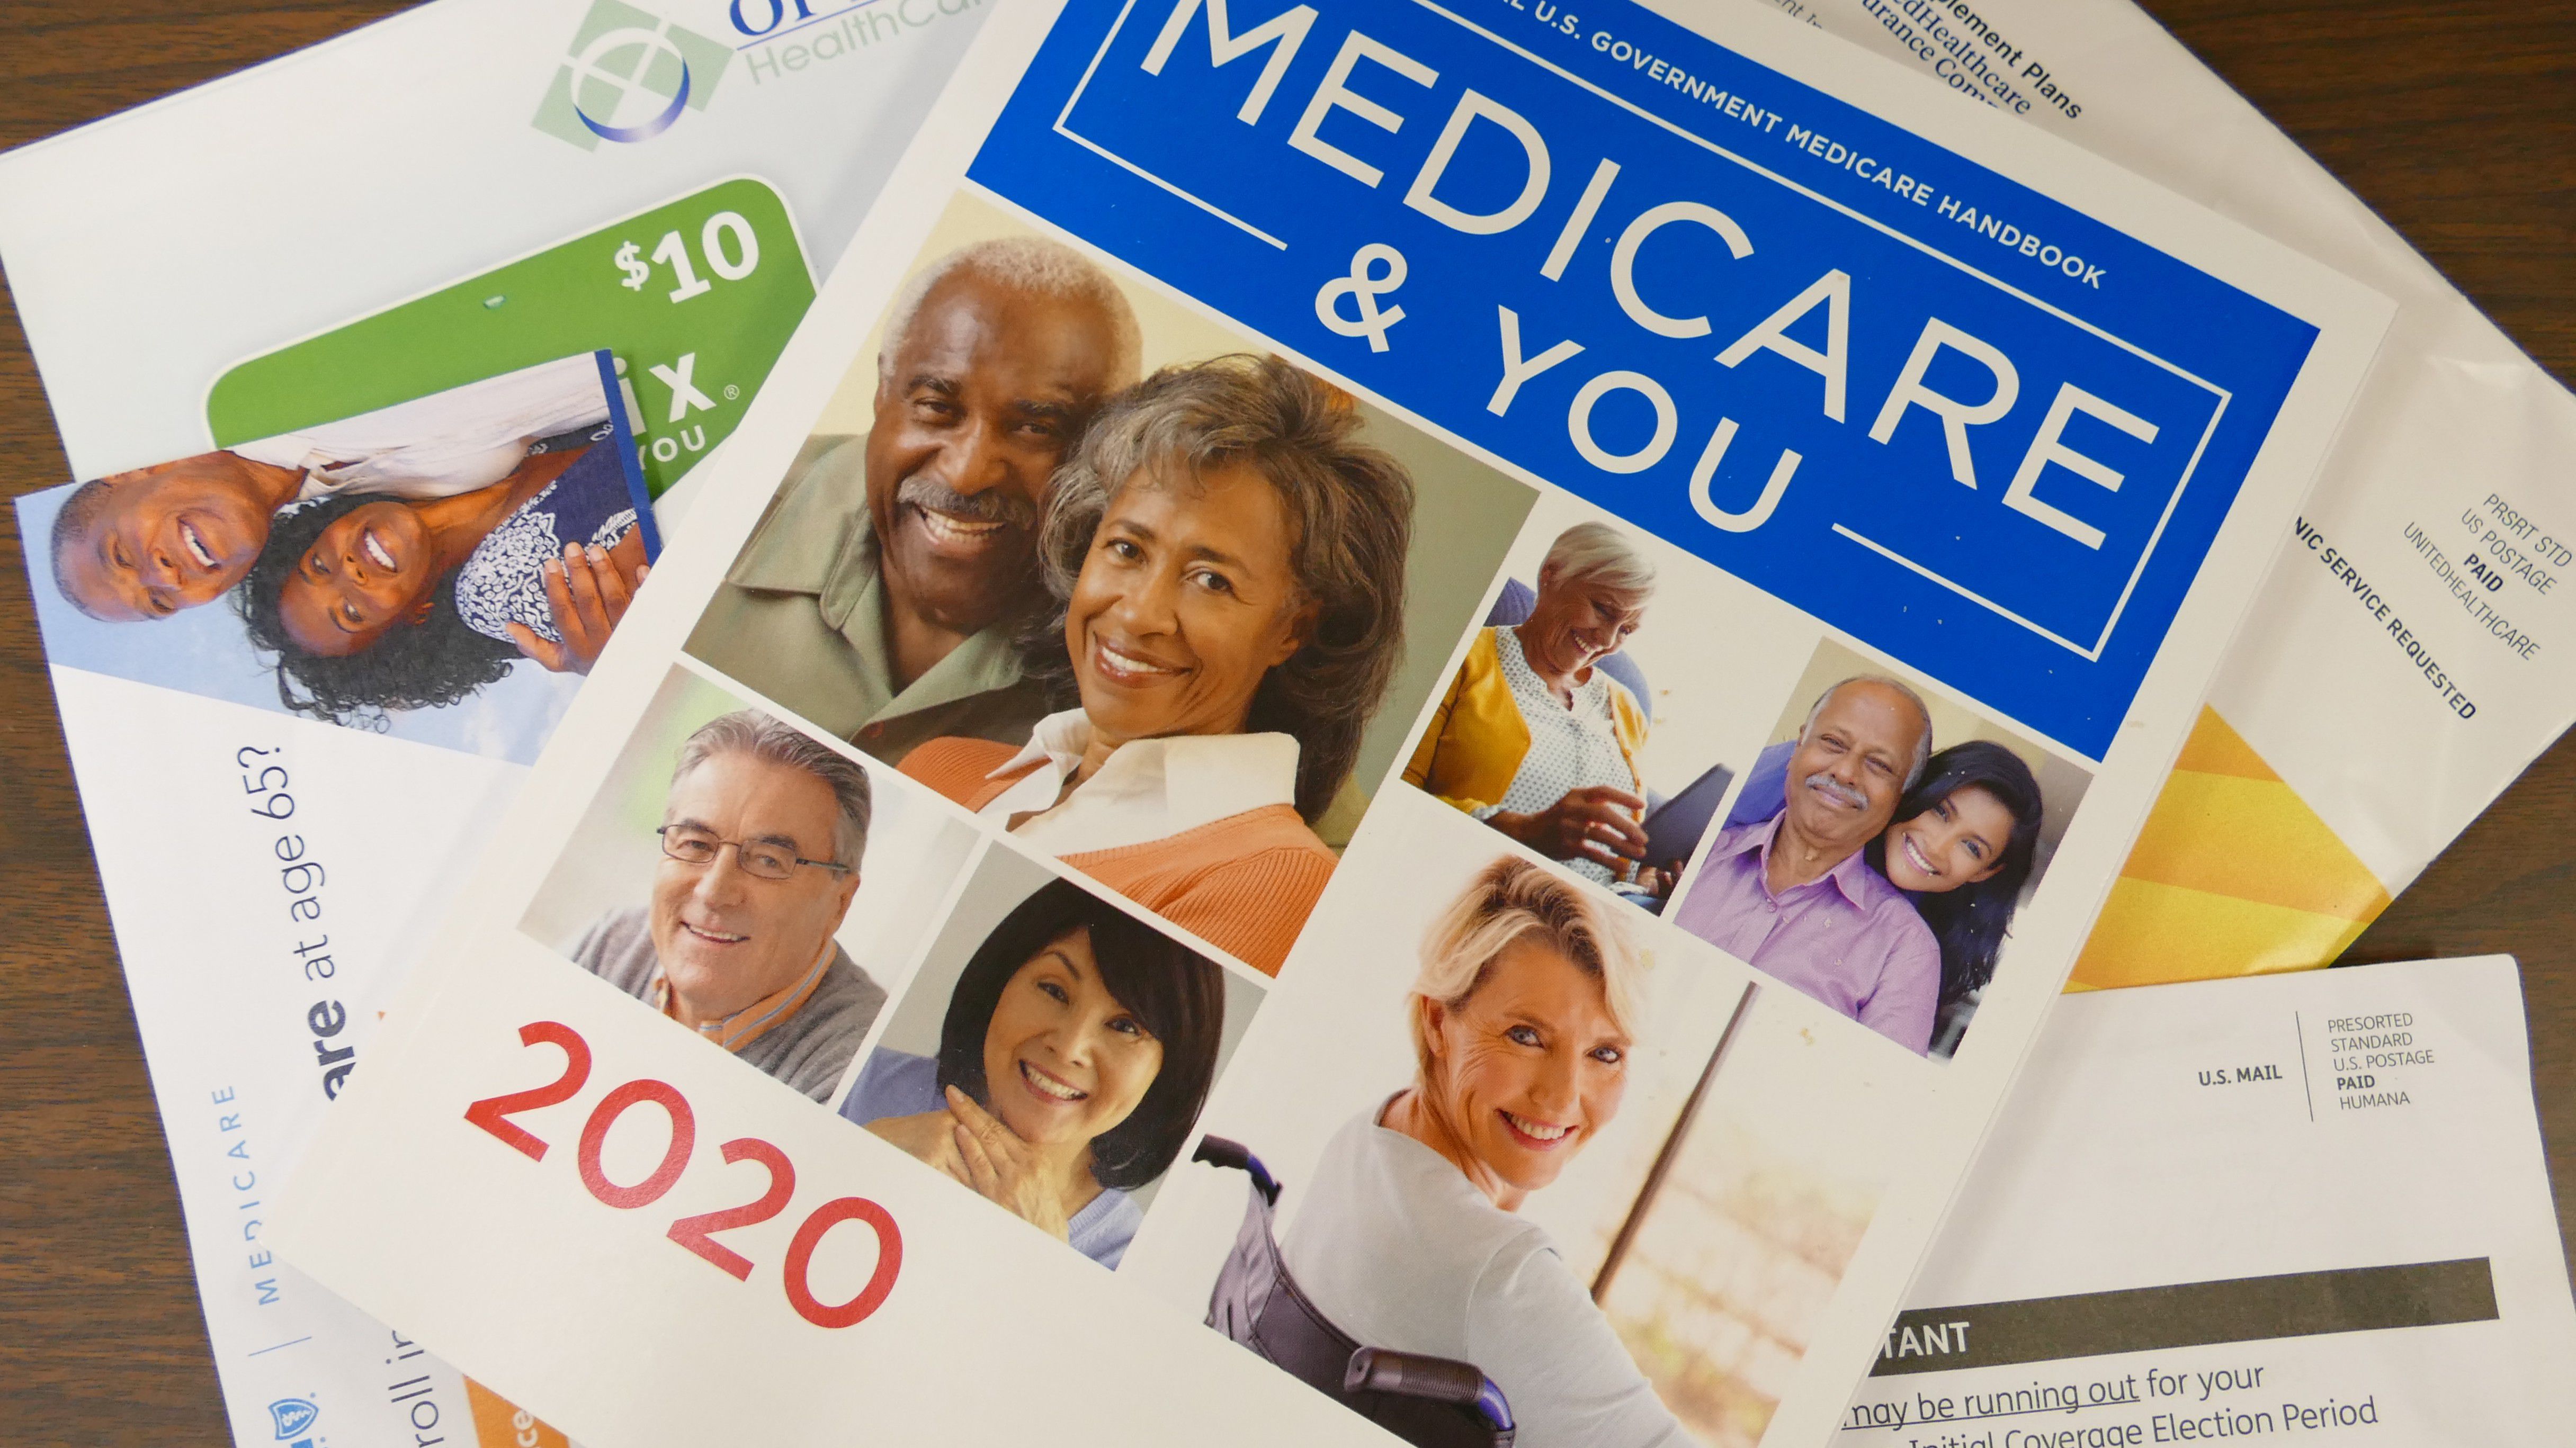 Staying With Your Medicare Prescription Plan Could Cost You More